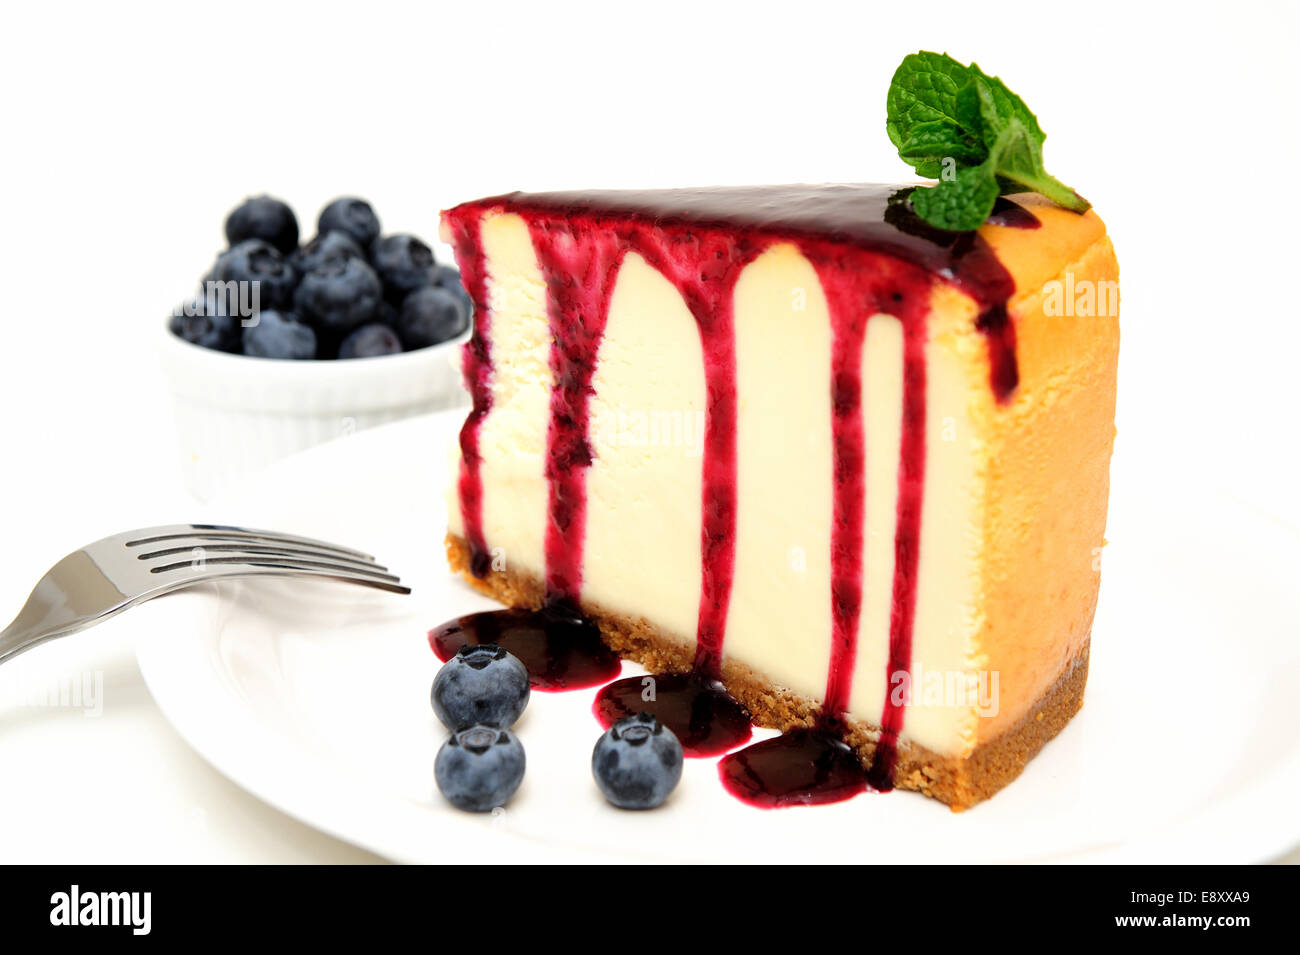 Cheesecake And Blueberries Stock Photo